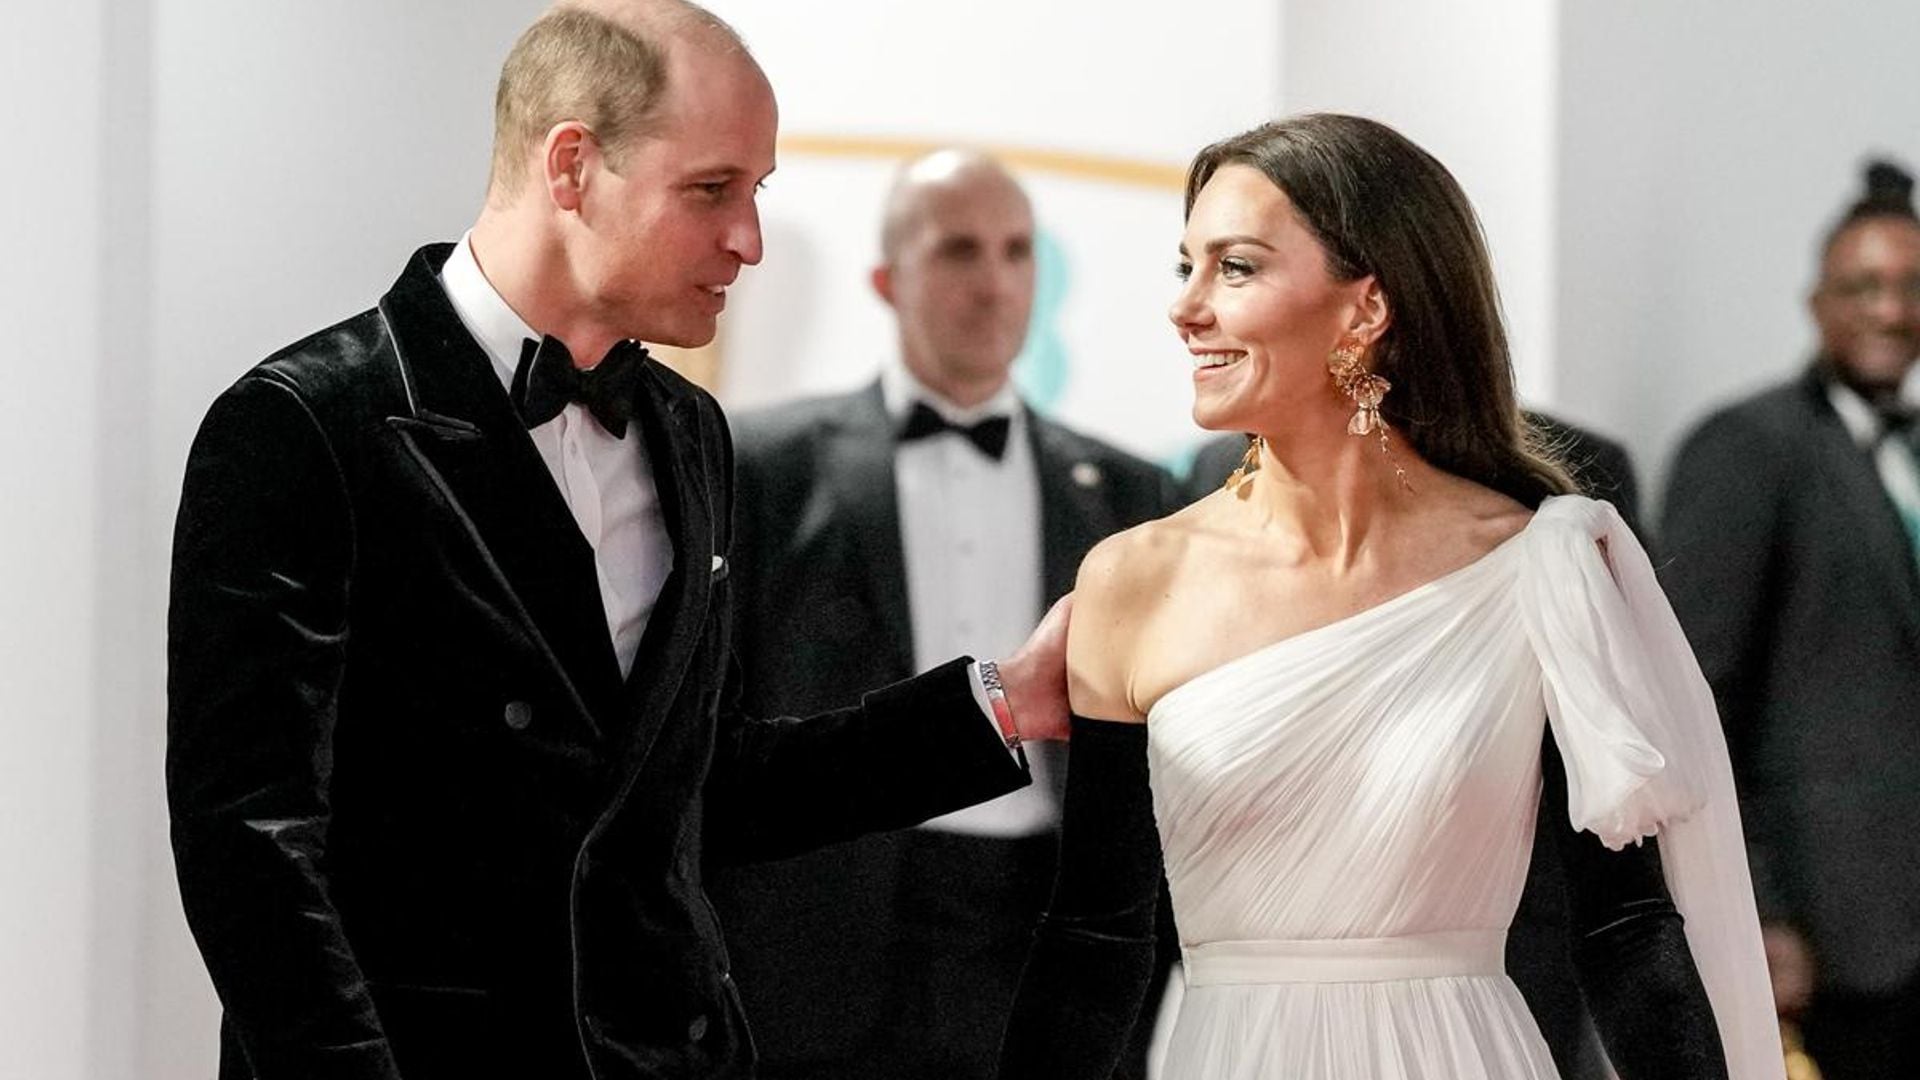 Prince William apologizes that the Princess of Wales missed an event she ‘loves’